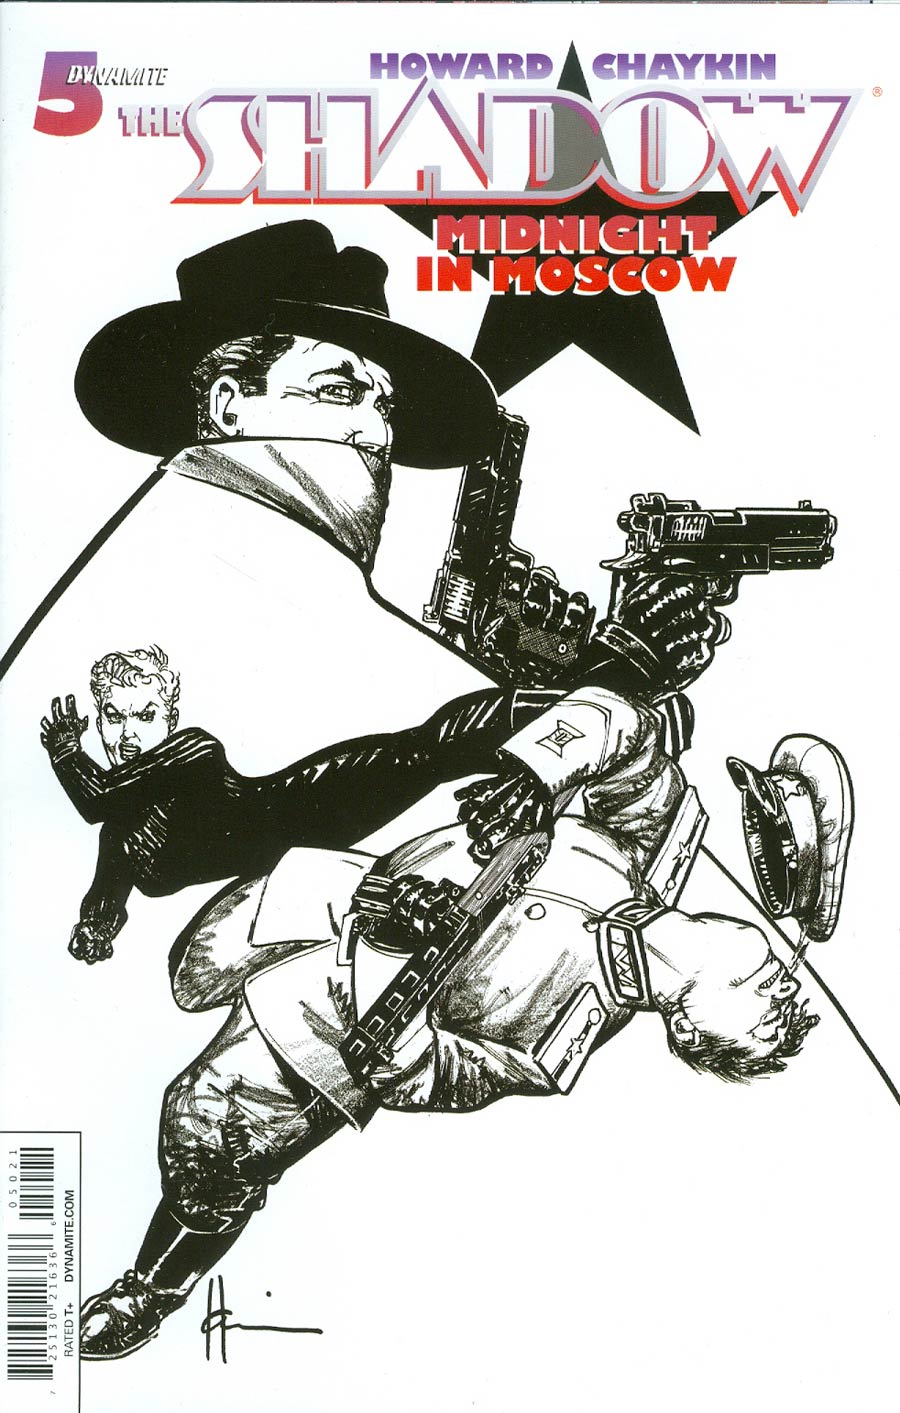 Shadow Midnight In Moscow #5 Cover B Rare Howard Chaykin Black & White Cover